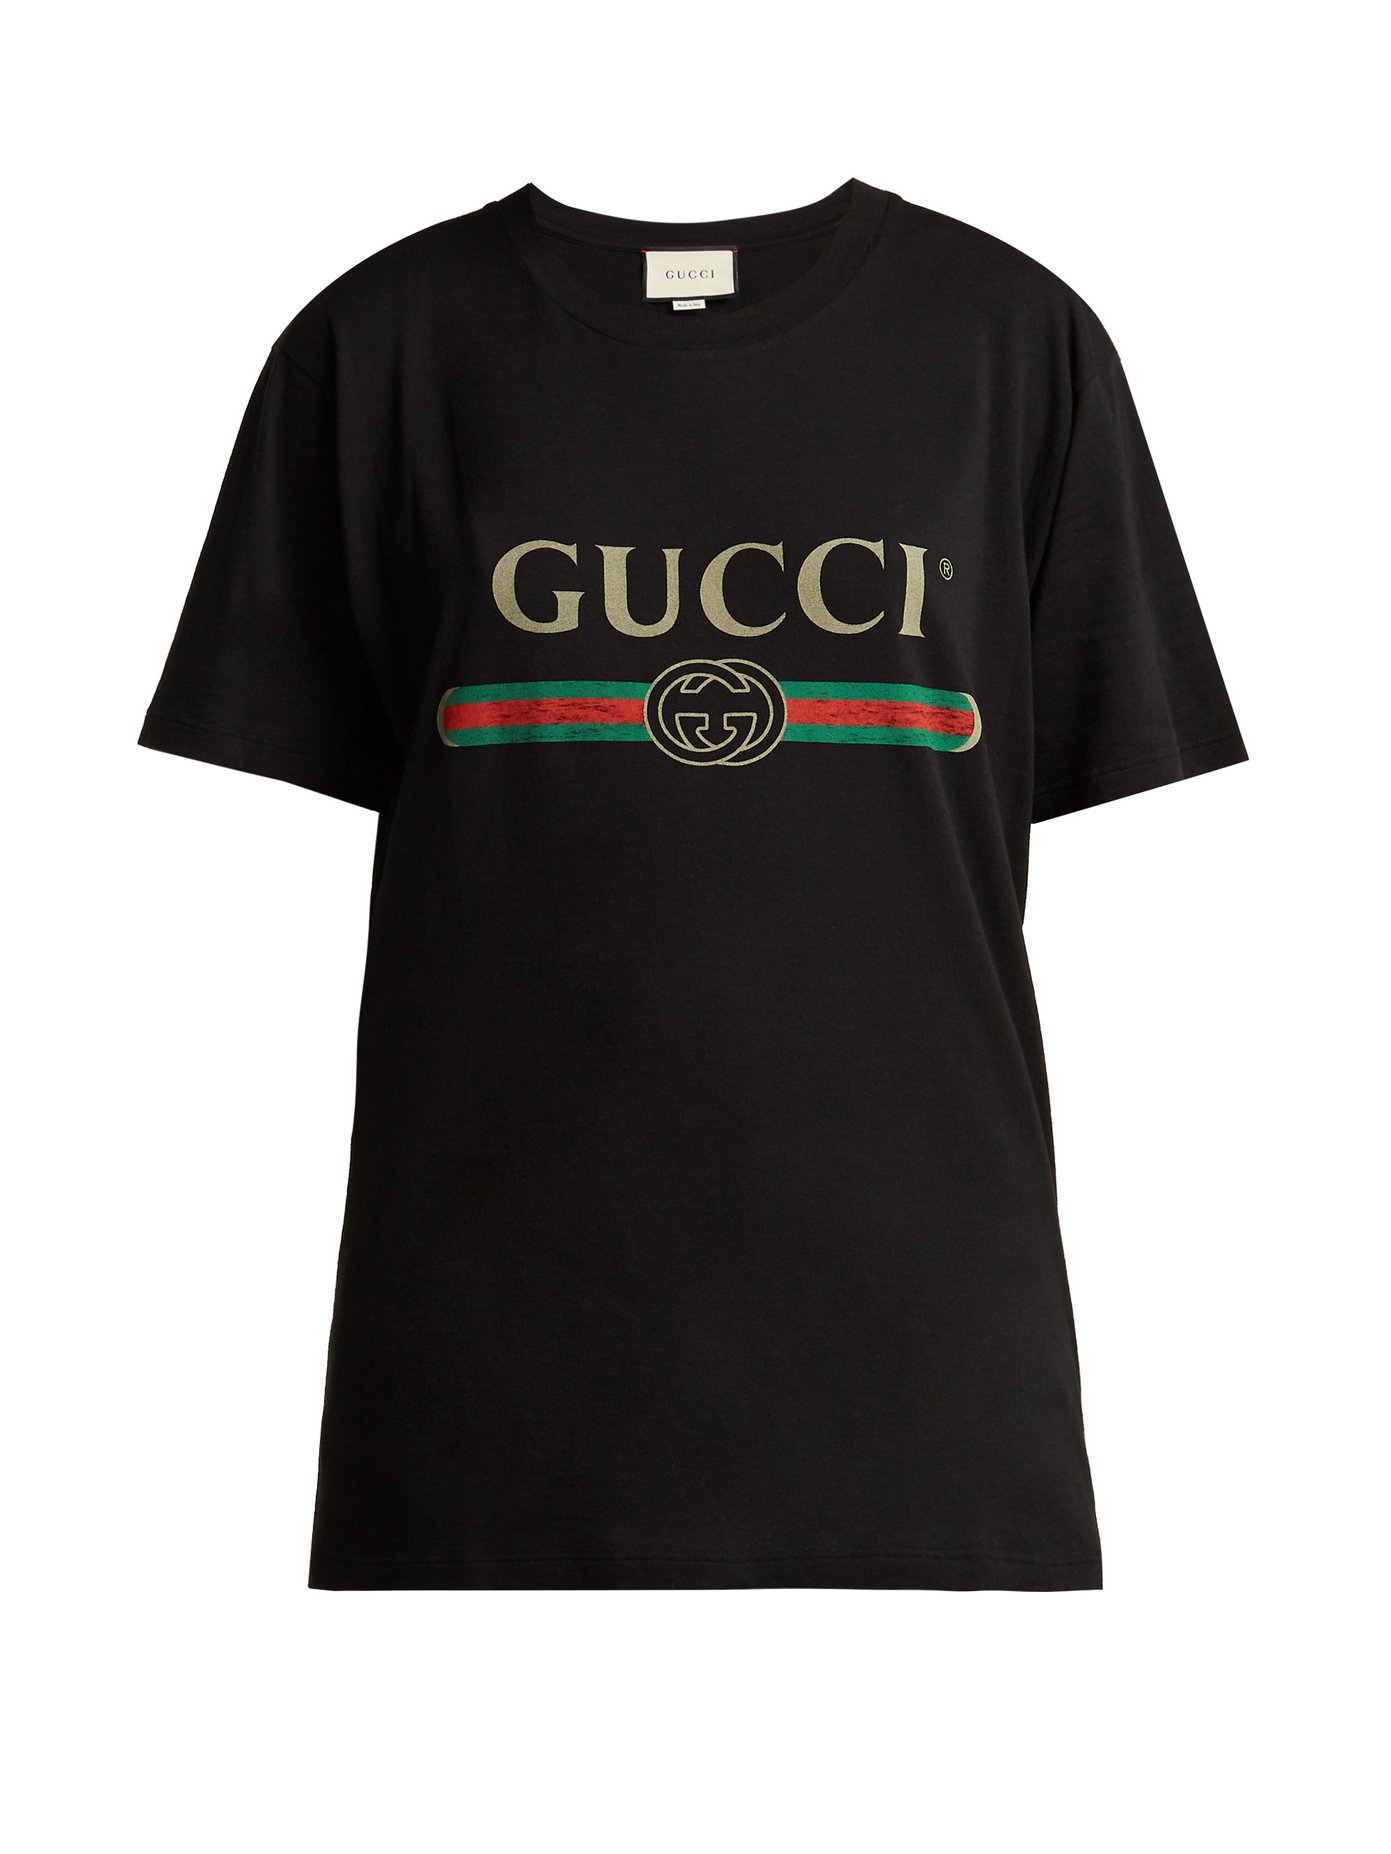 gucci t shirt 12 years old